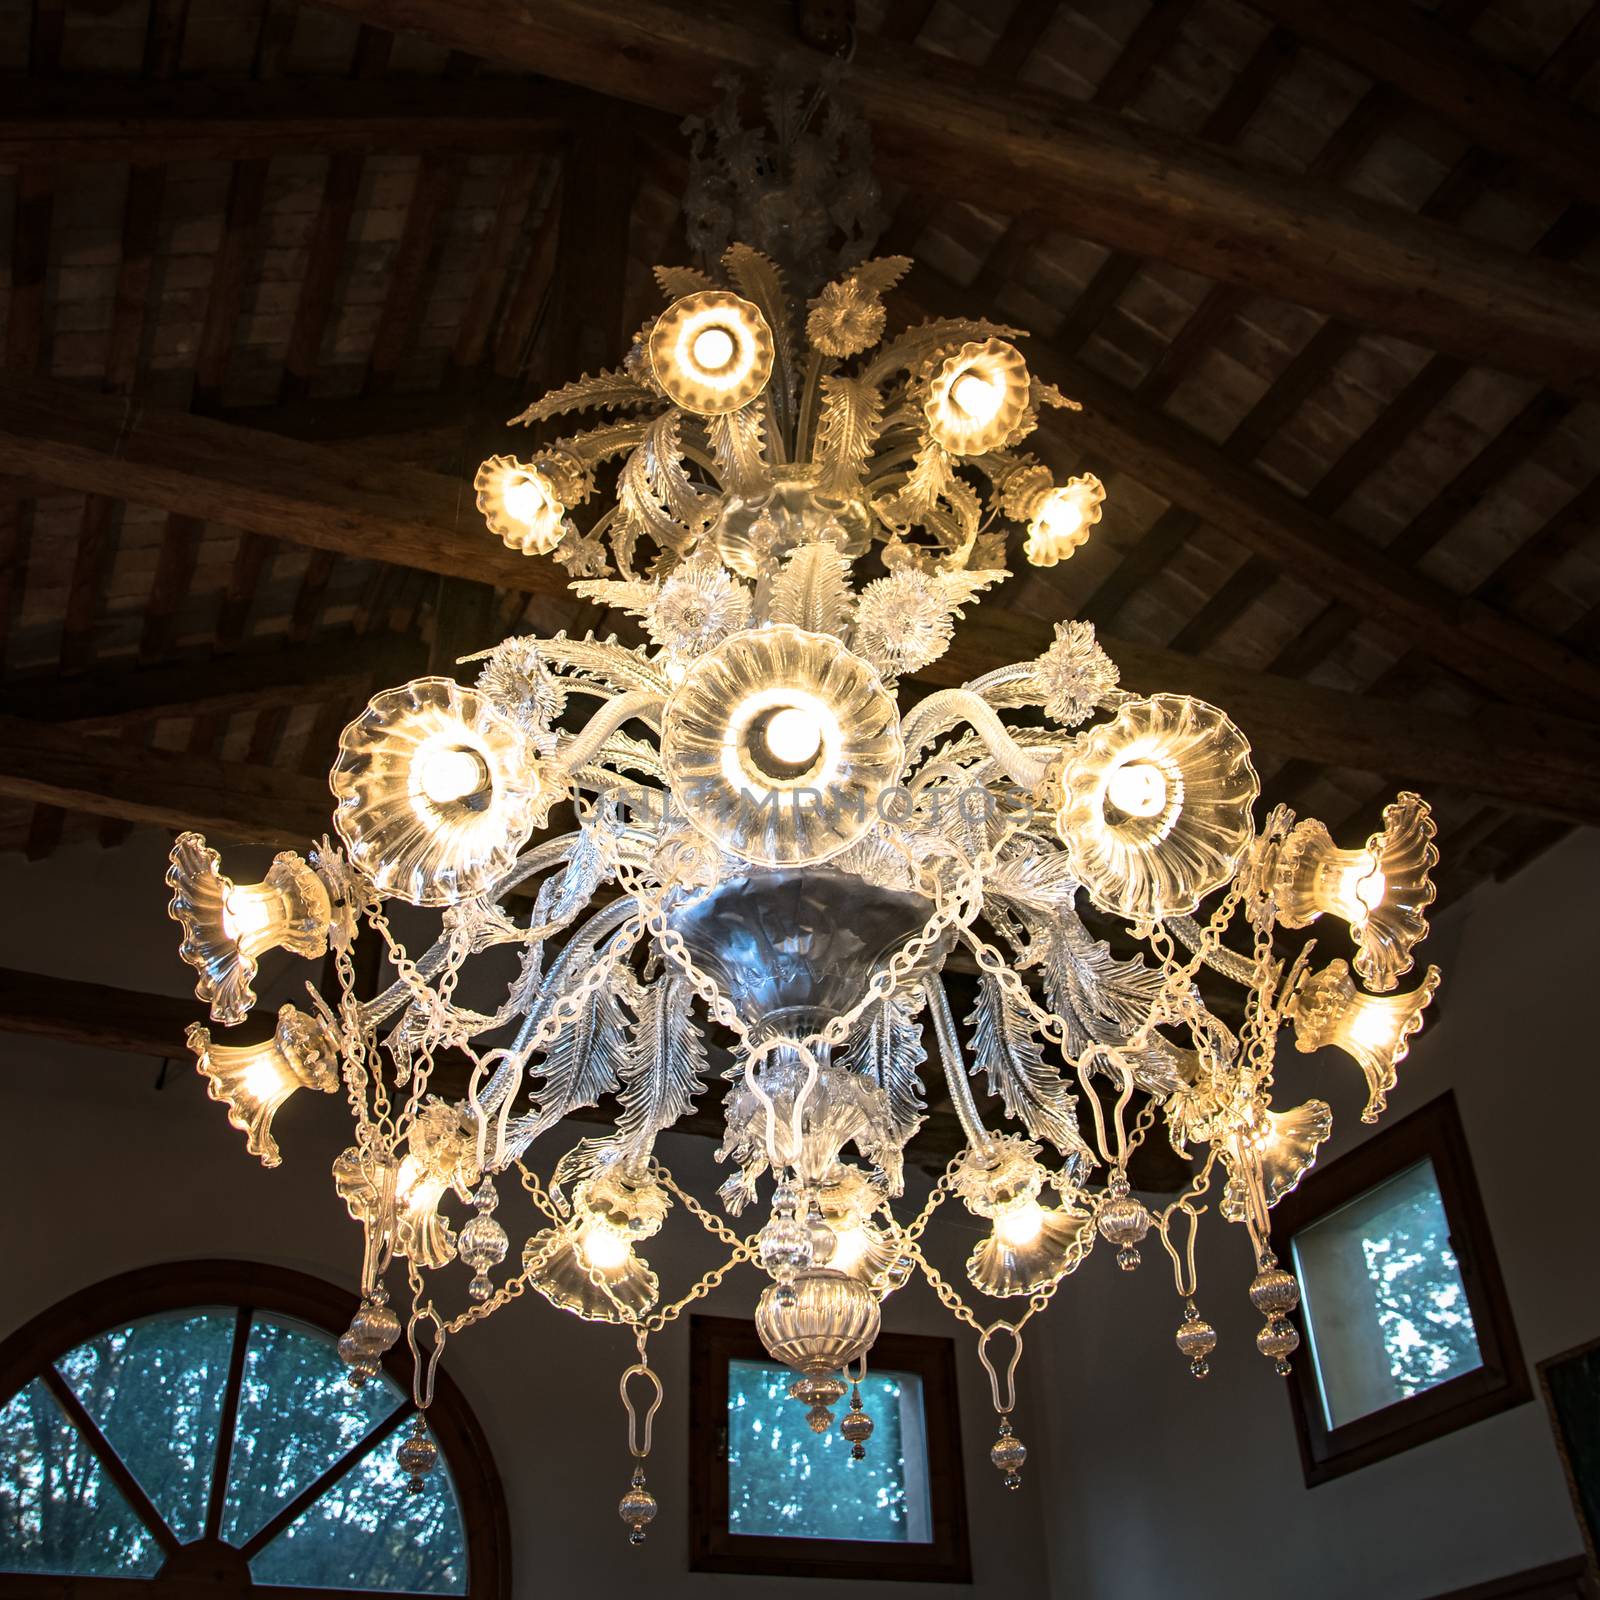 Antique chandelier of blown glass. by Isaac74